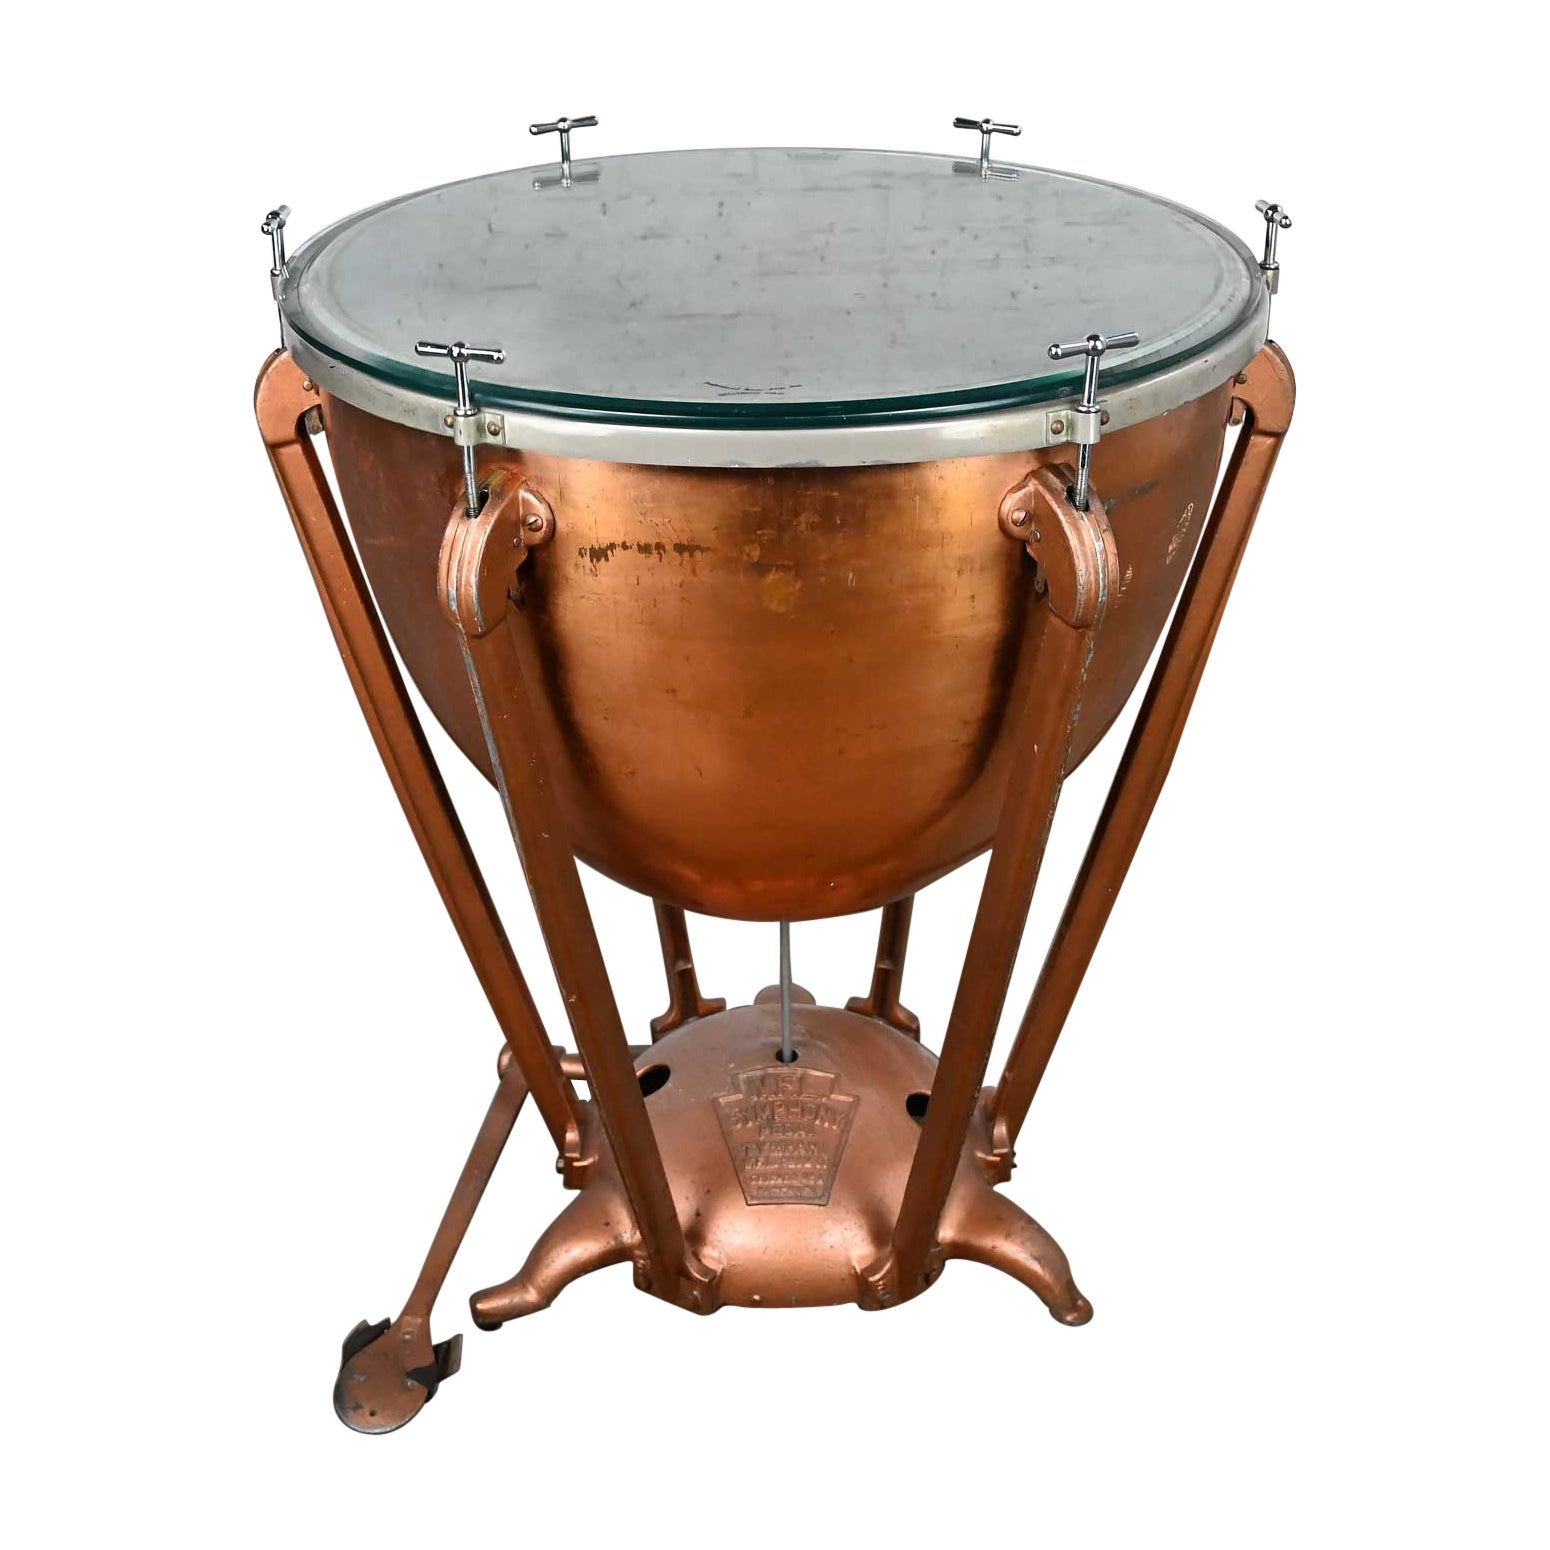 Steampunk Industrial Copper Timpani Kettle Drum Center Table by WFL Drum Co 